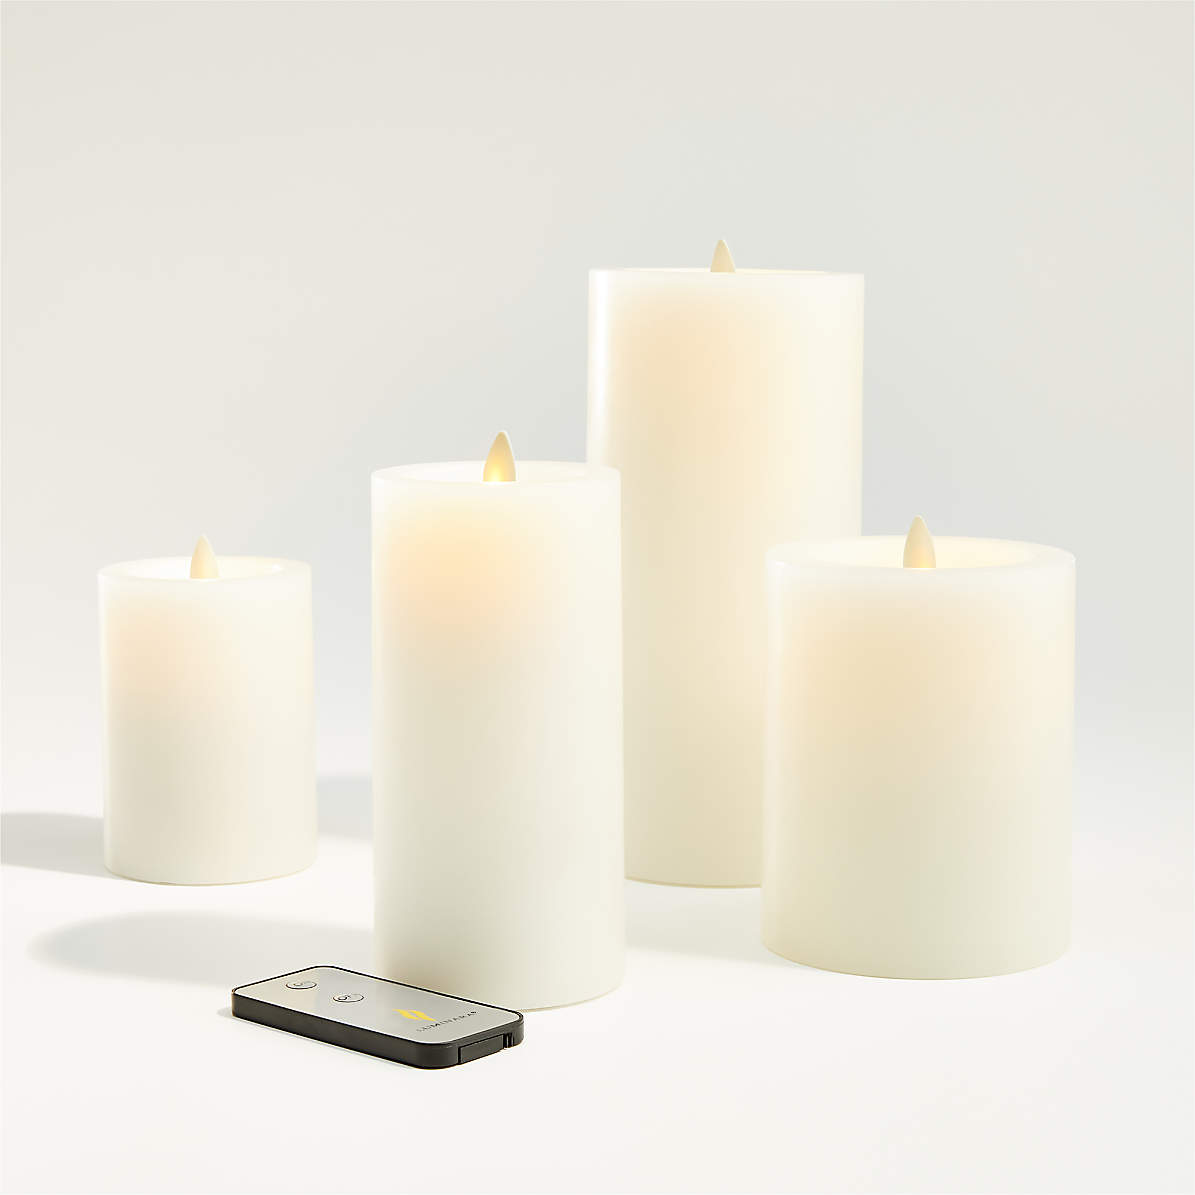 Warm White Flicker Flameless Wax Candles